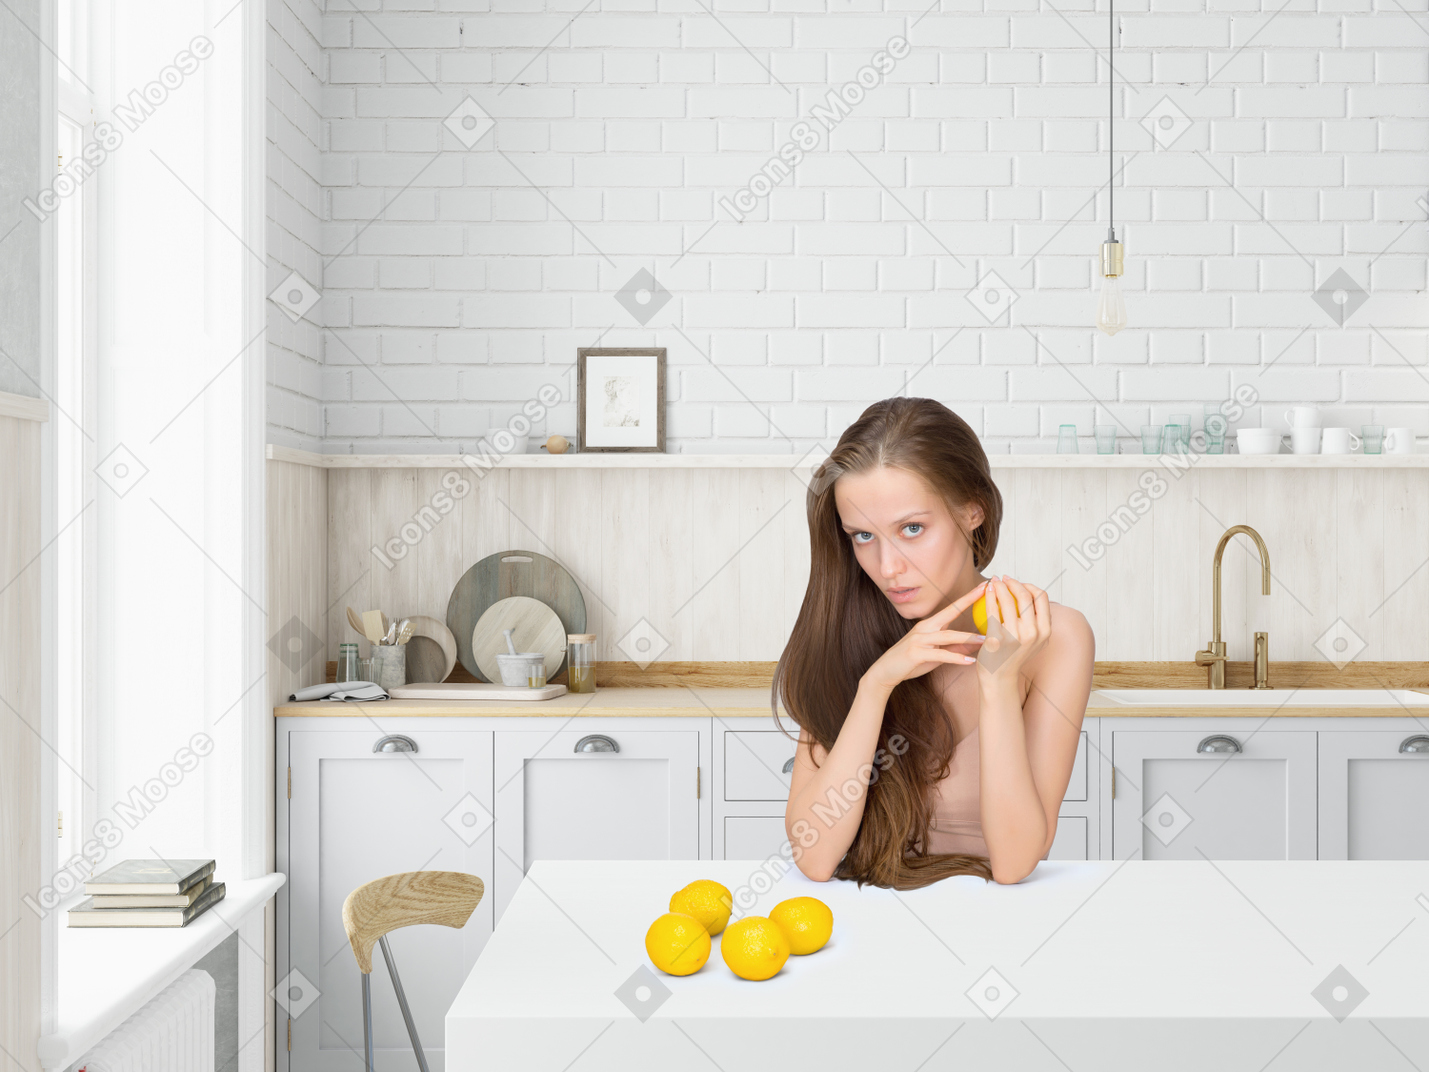 Young woman sitting in the kitchen and holding lemon